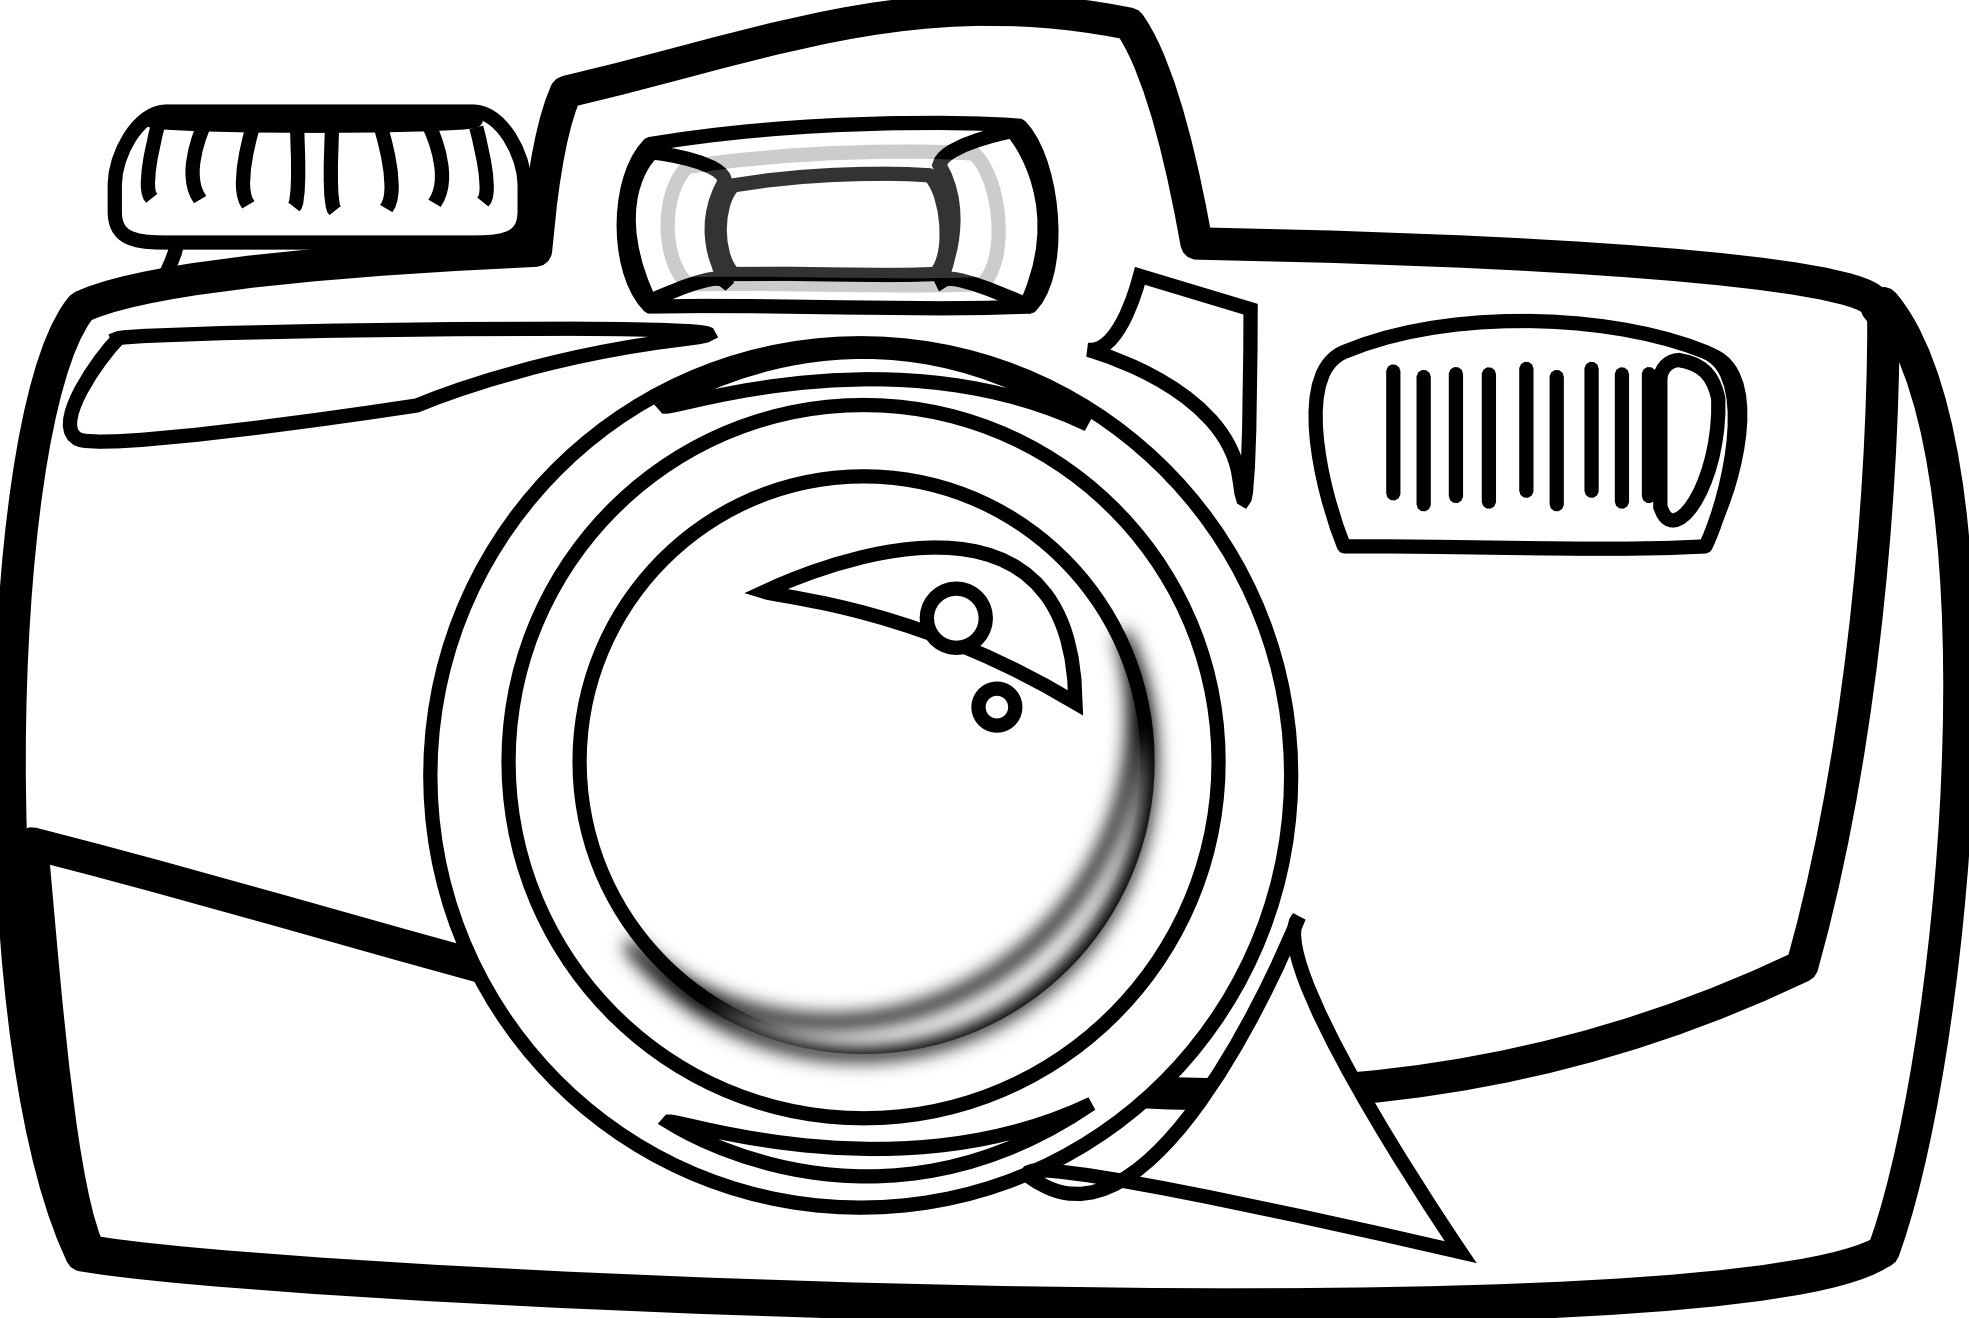 cam clipart black and white
